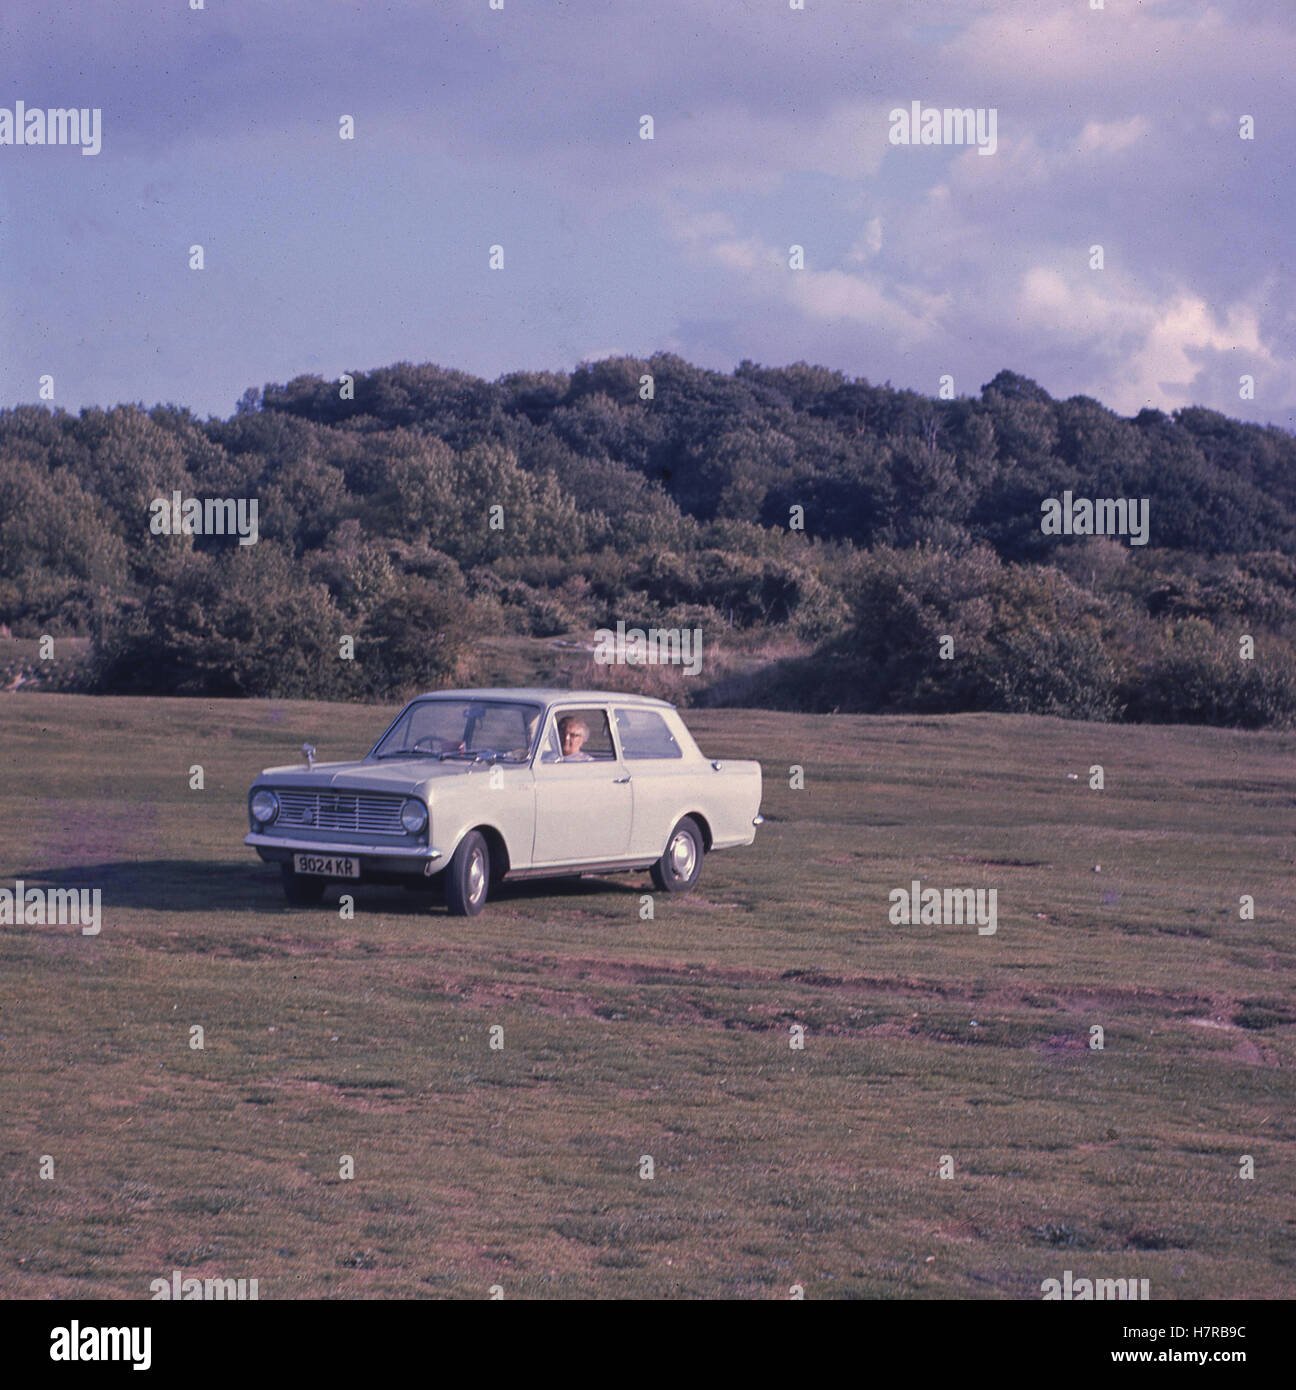 1960s, historical, Small compact family car, the 2-door saloon Vauxhall Viva HA parked outside in a field. Stock Photo